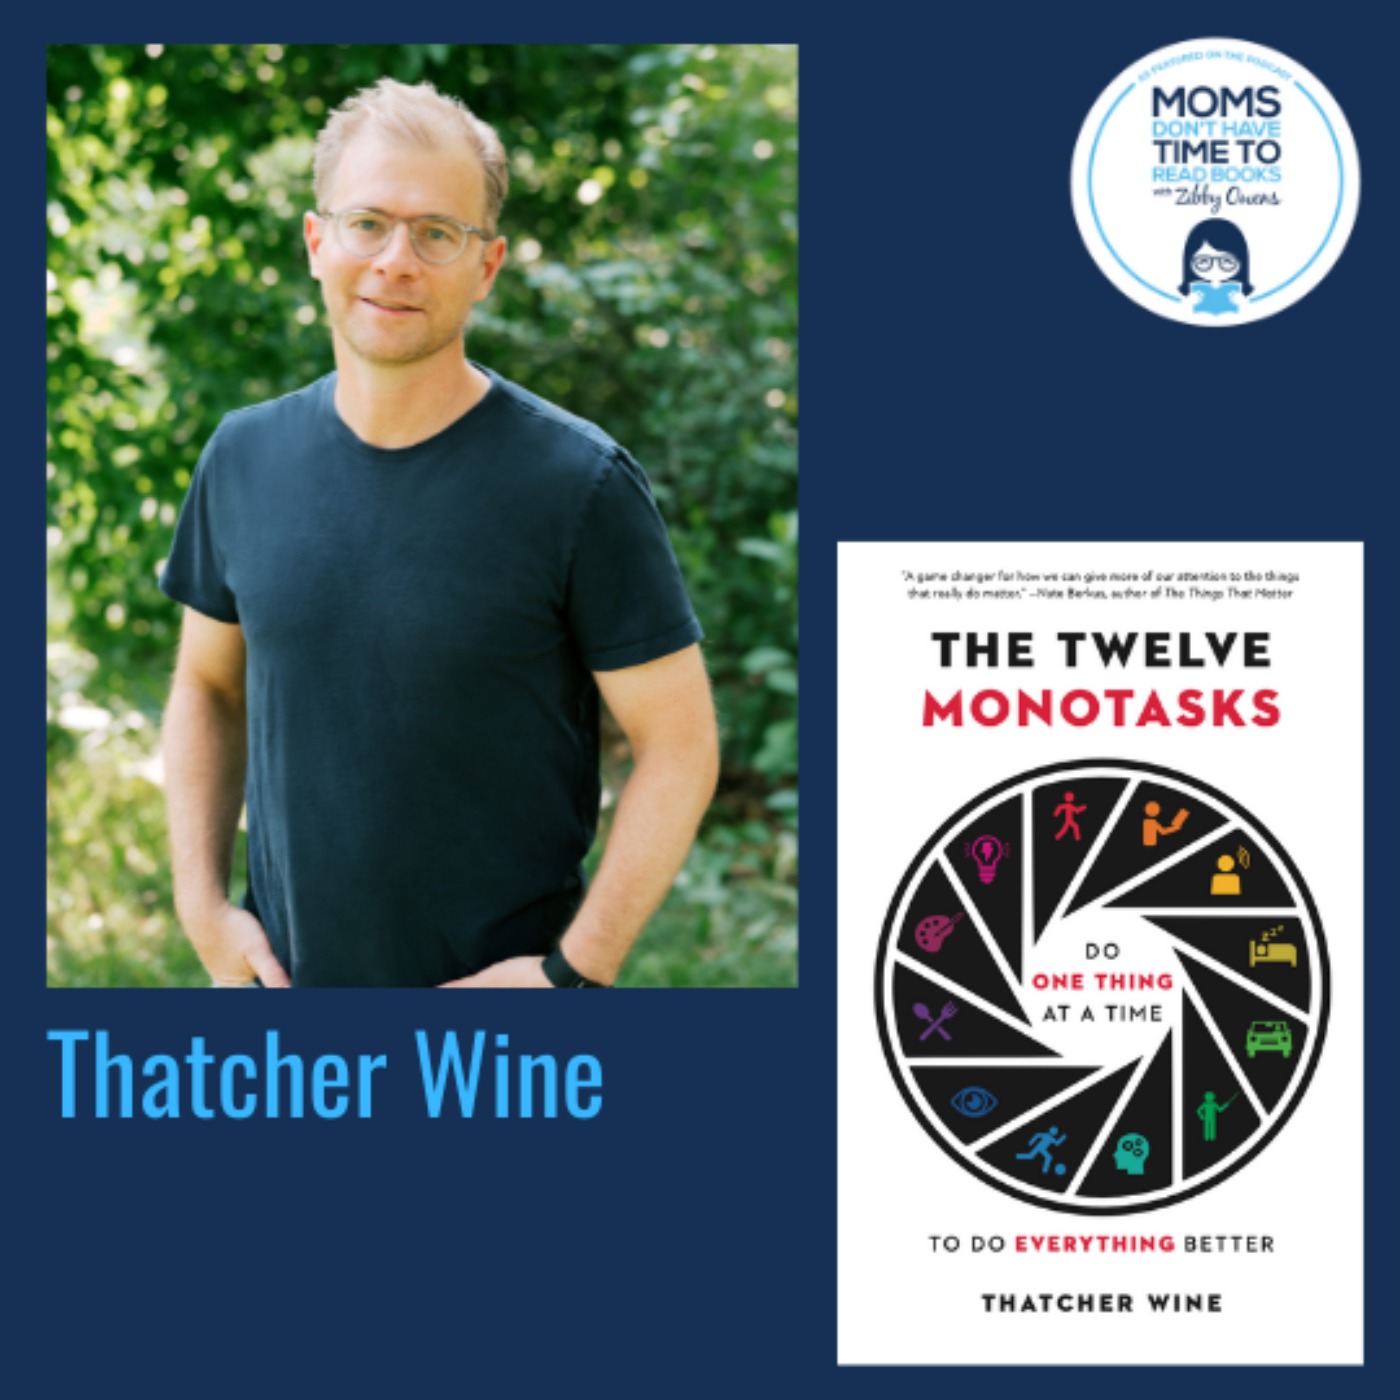 Thatcher Wine, THE TWELVE MONOTASKS: Do One Thing at a Time to Do Everything Better